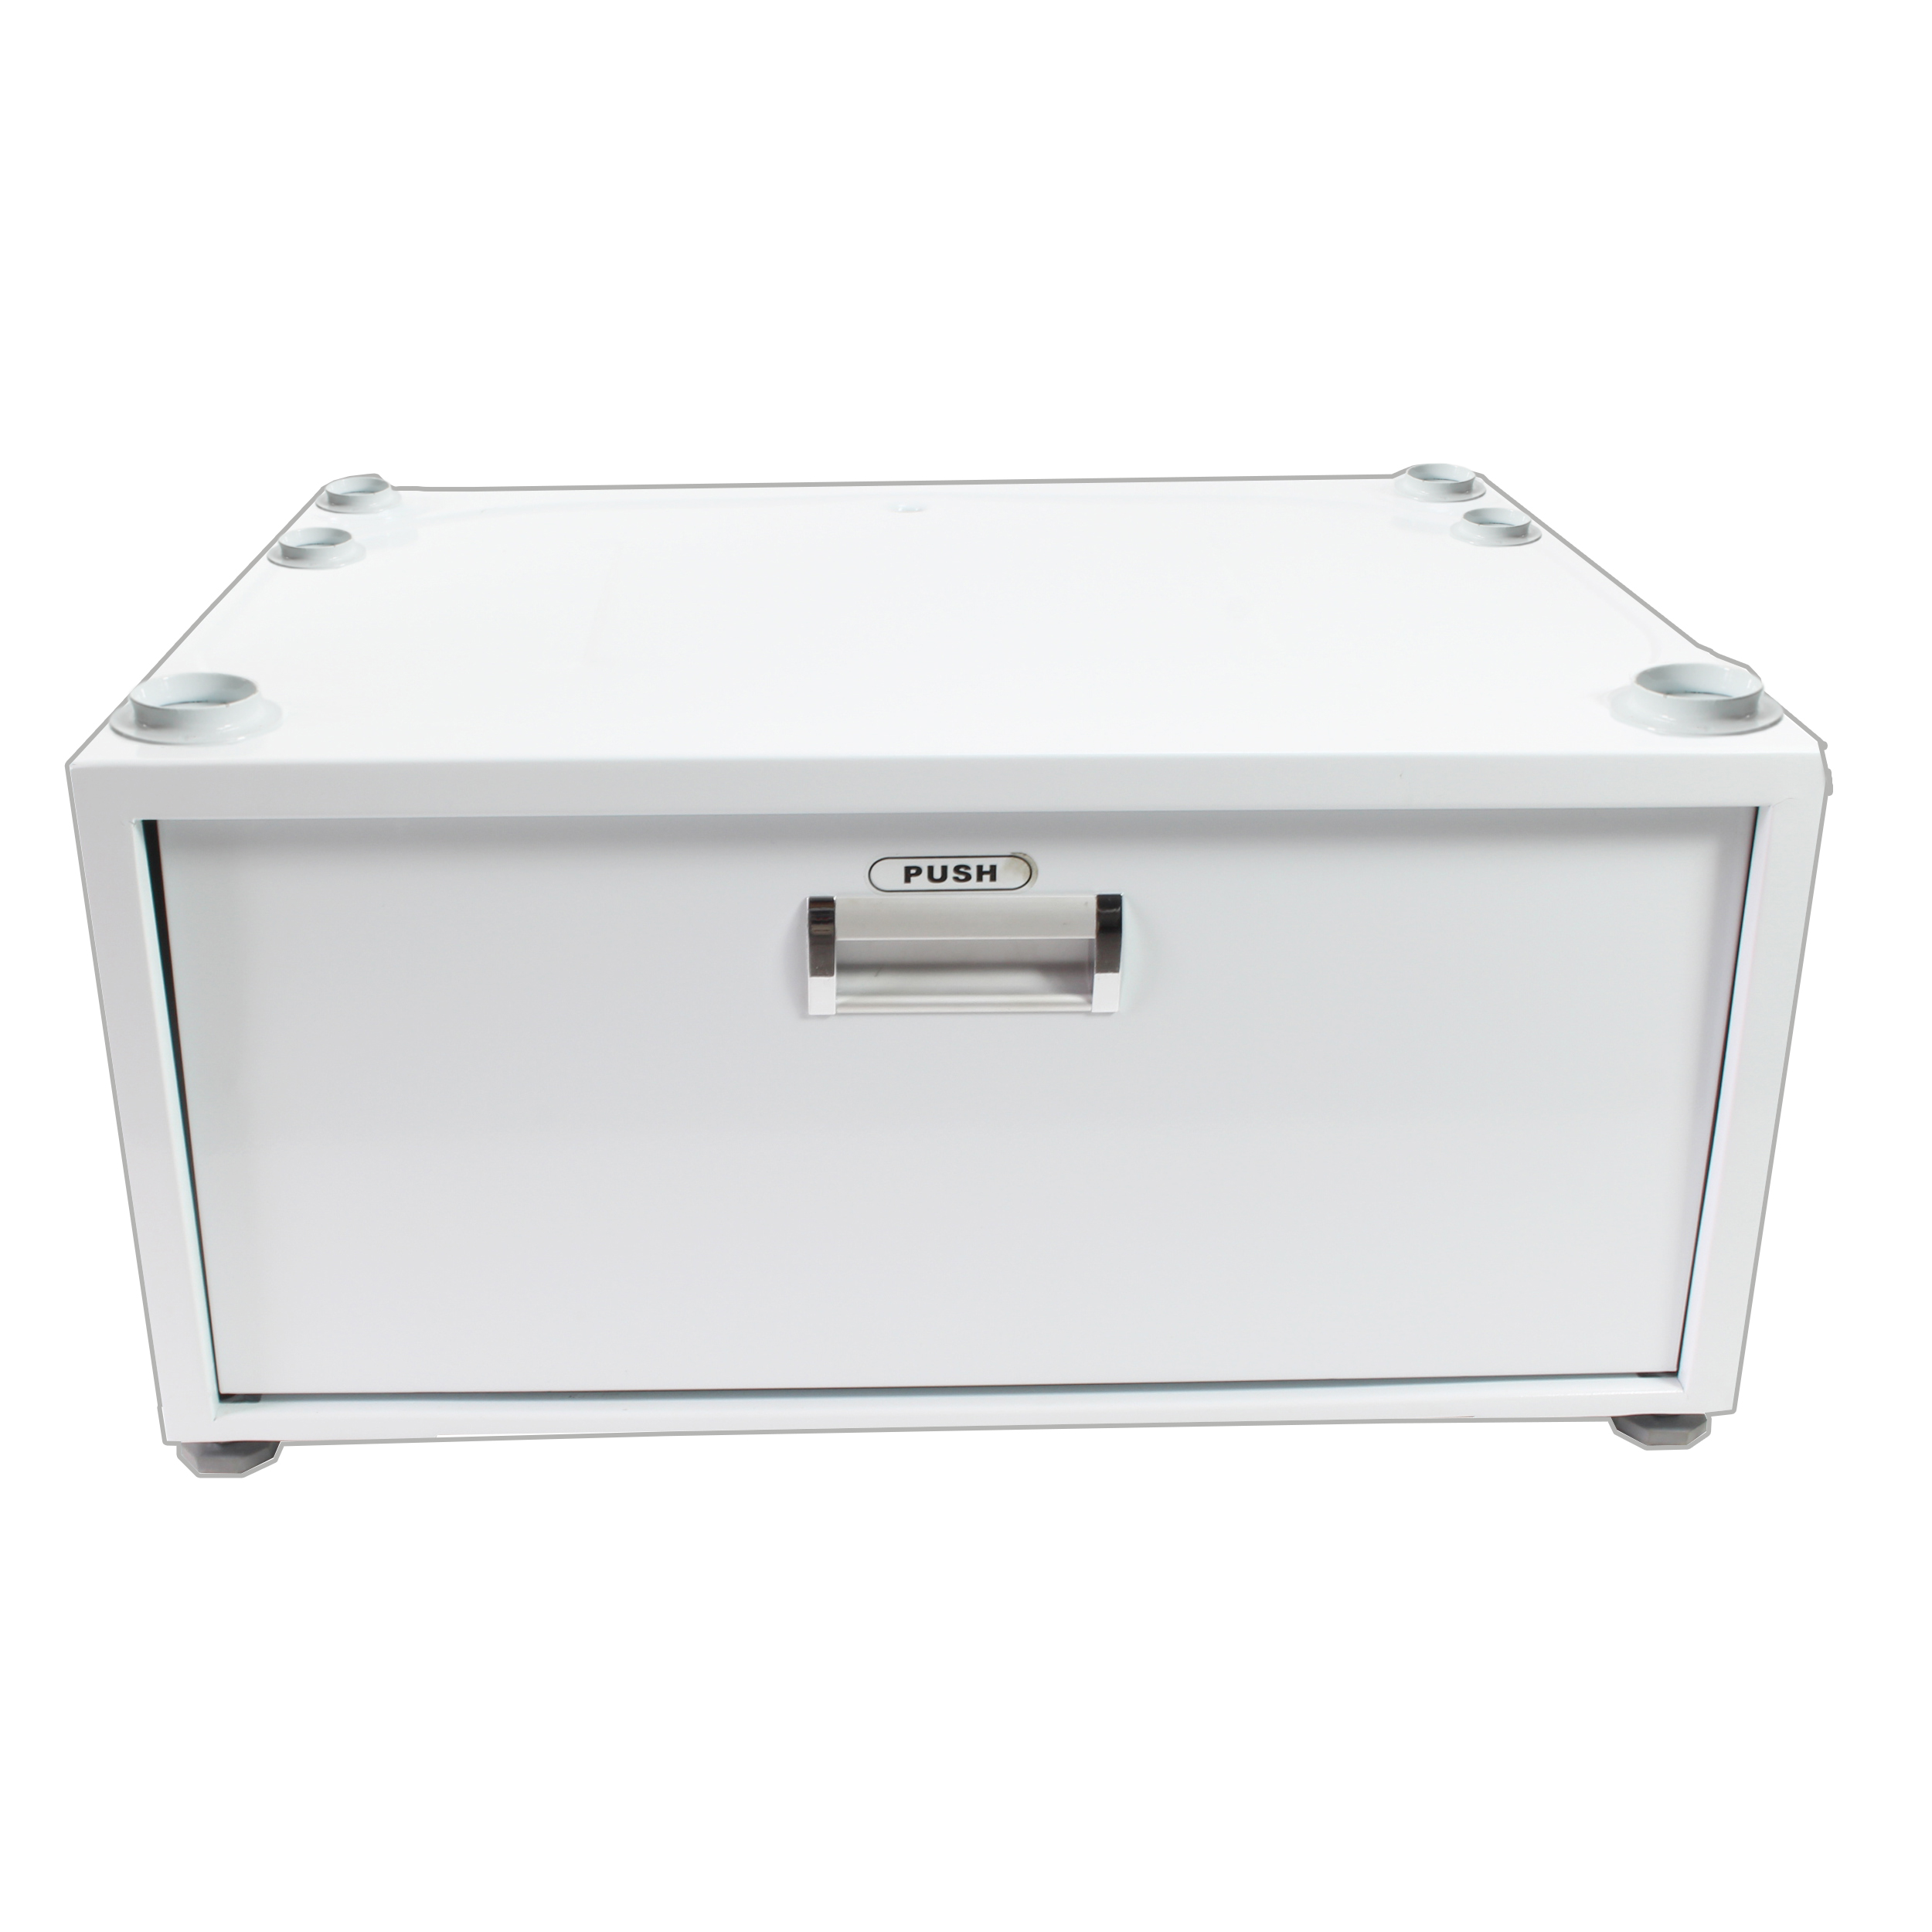 Equator Laundry Pedestal with Drawer